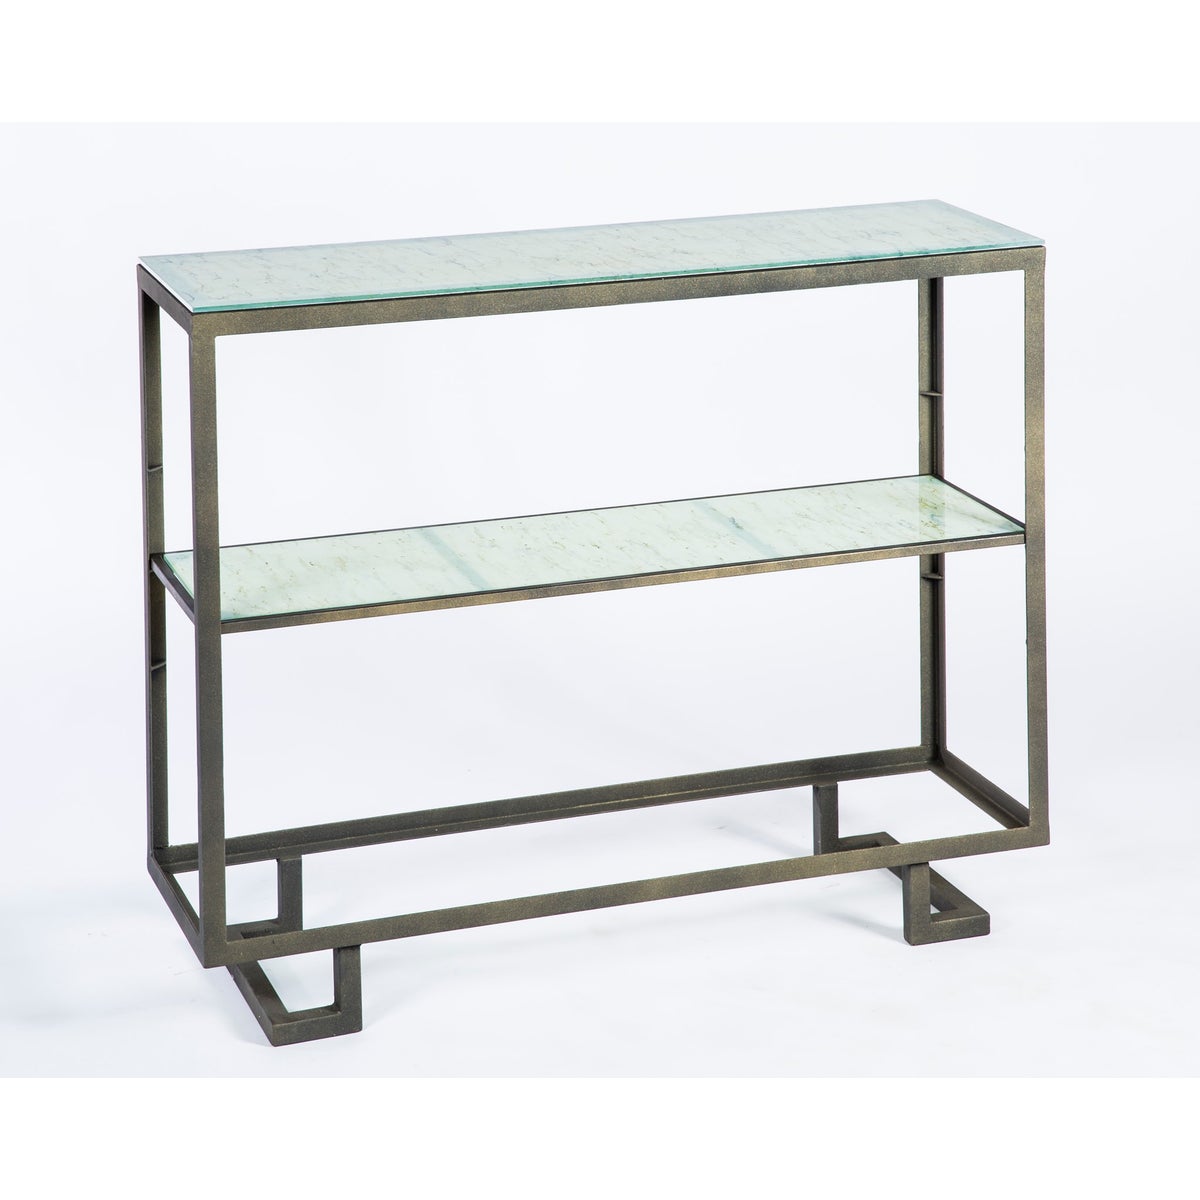 Wallace Console Table in Antique Bronze with Shelves in Wrinkled Linen 